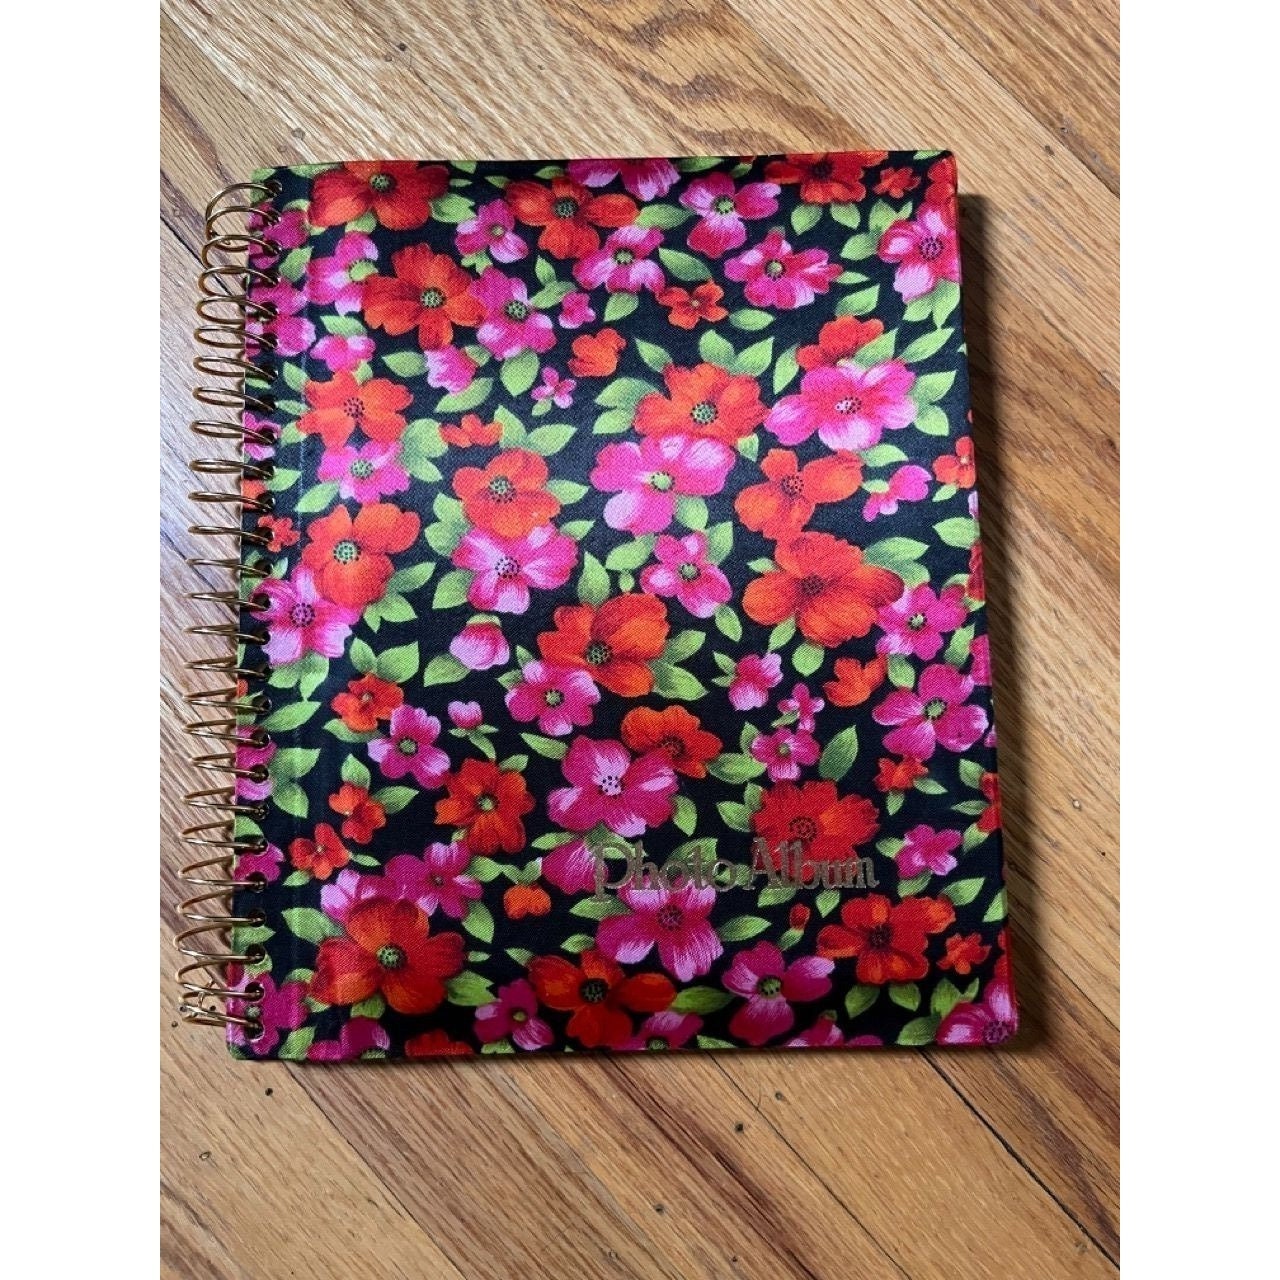 Vintage 60s 70s Pink Photo Album Floral Print with 54 Pictures